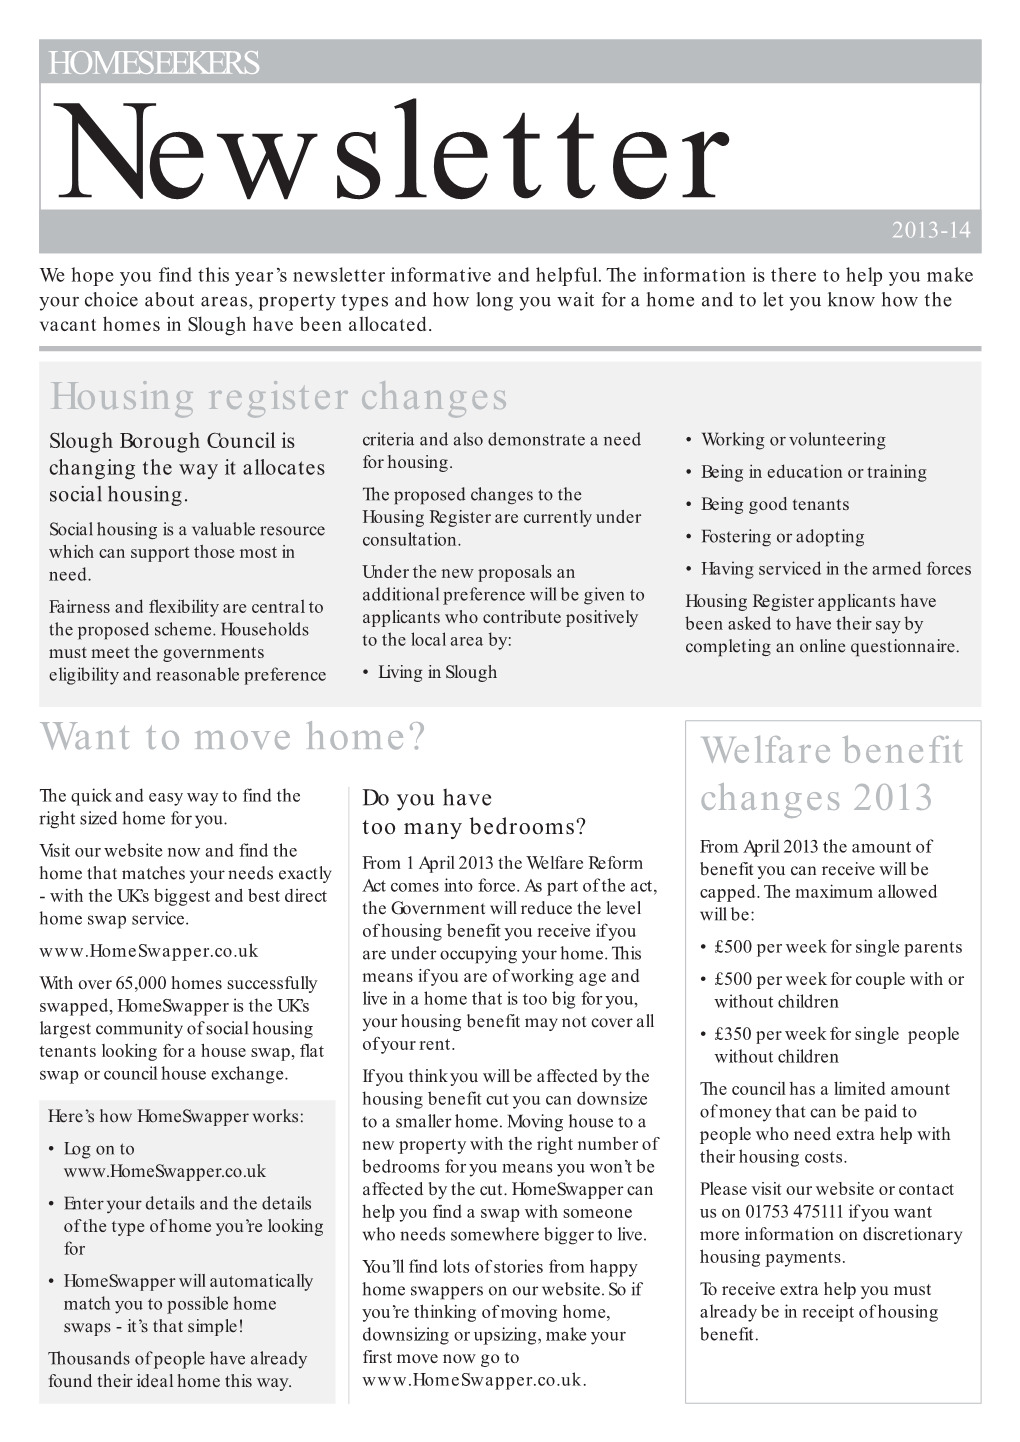 Housing Register Changes Want to Move Home?